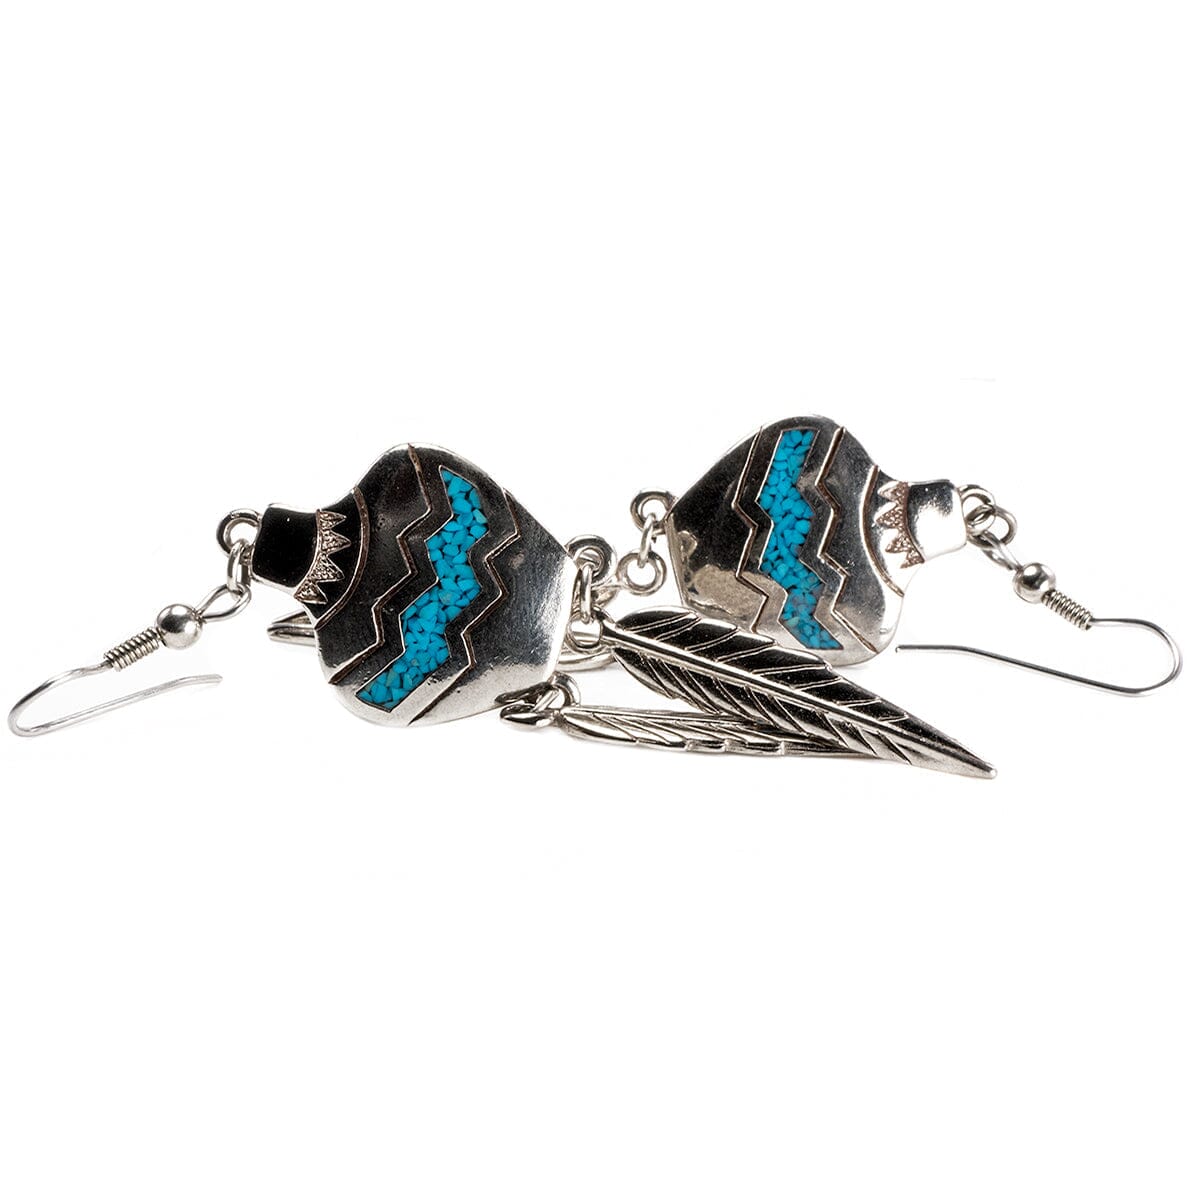 Great Lakes Boutique Native American Inspired Earrings